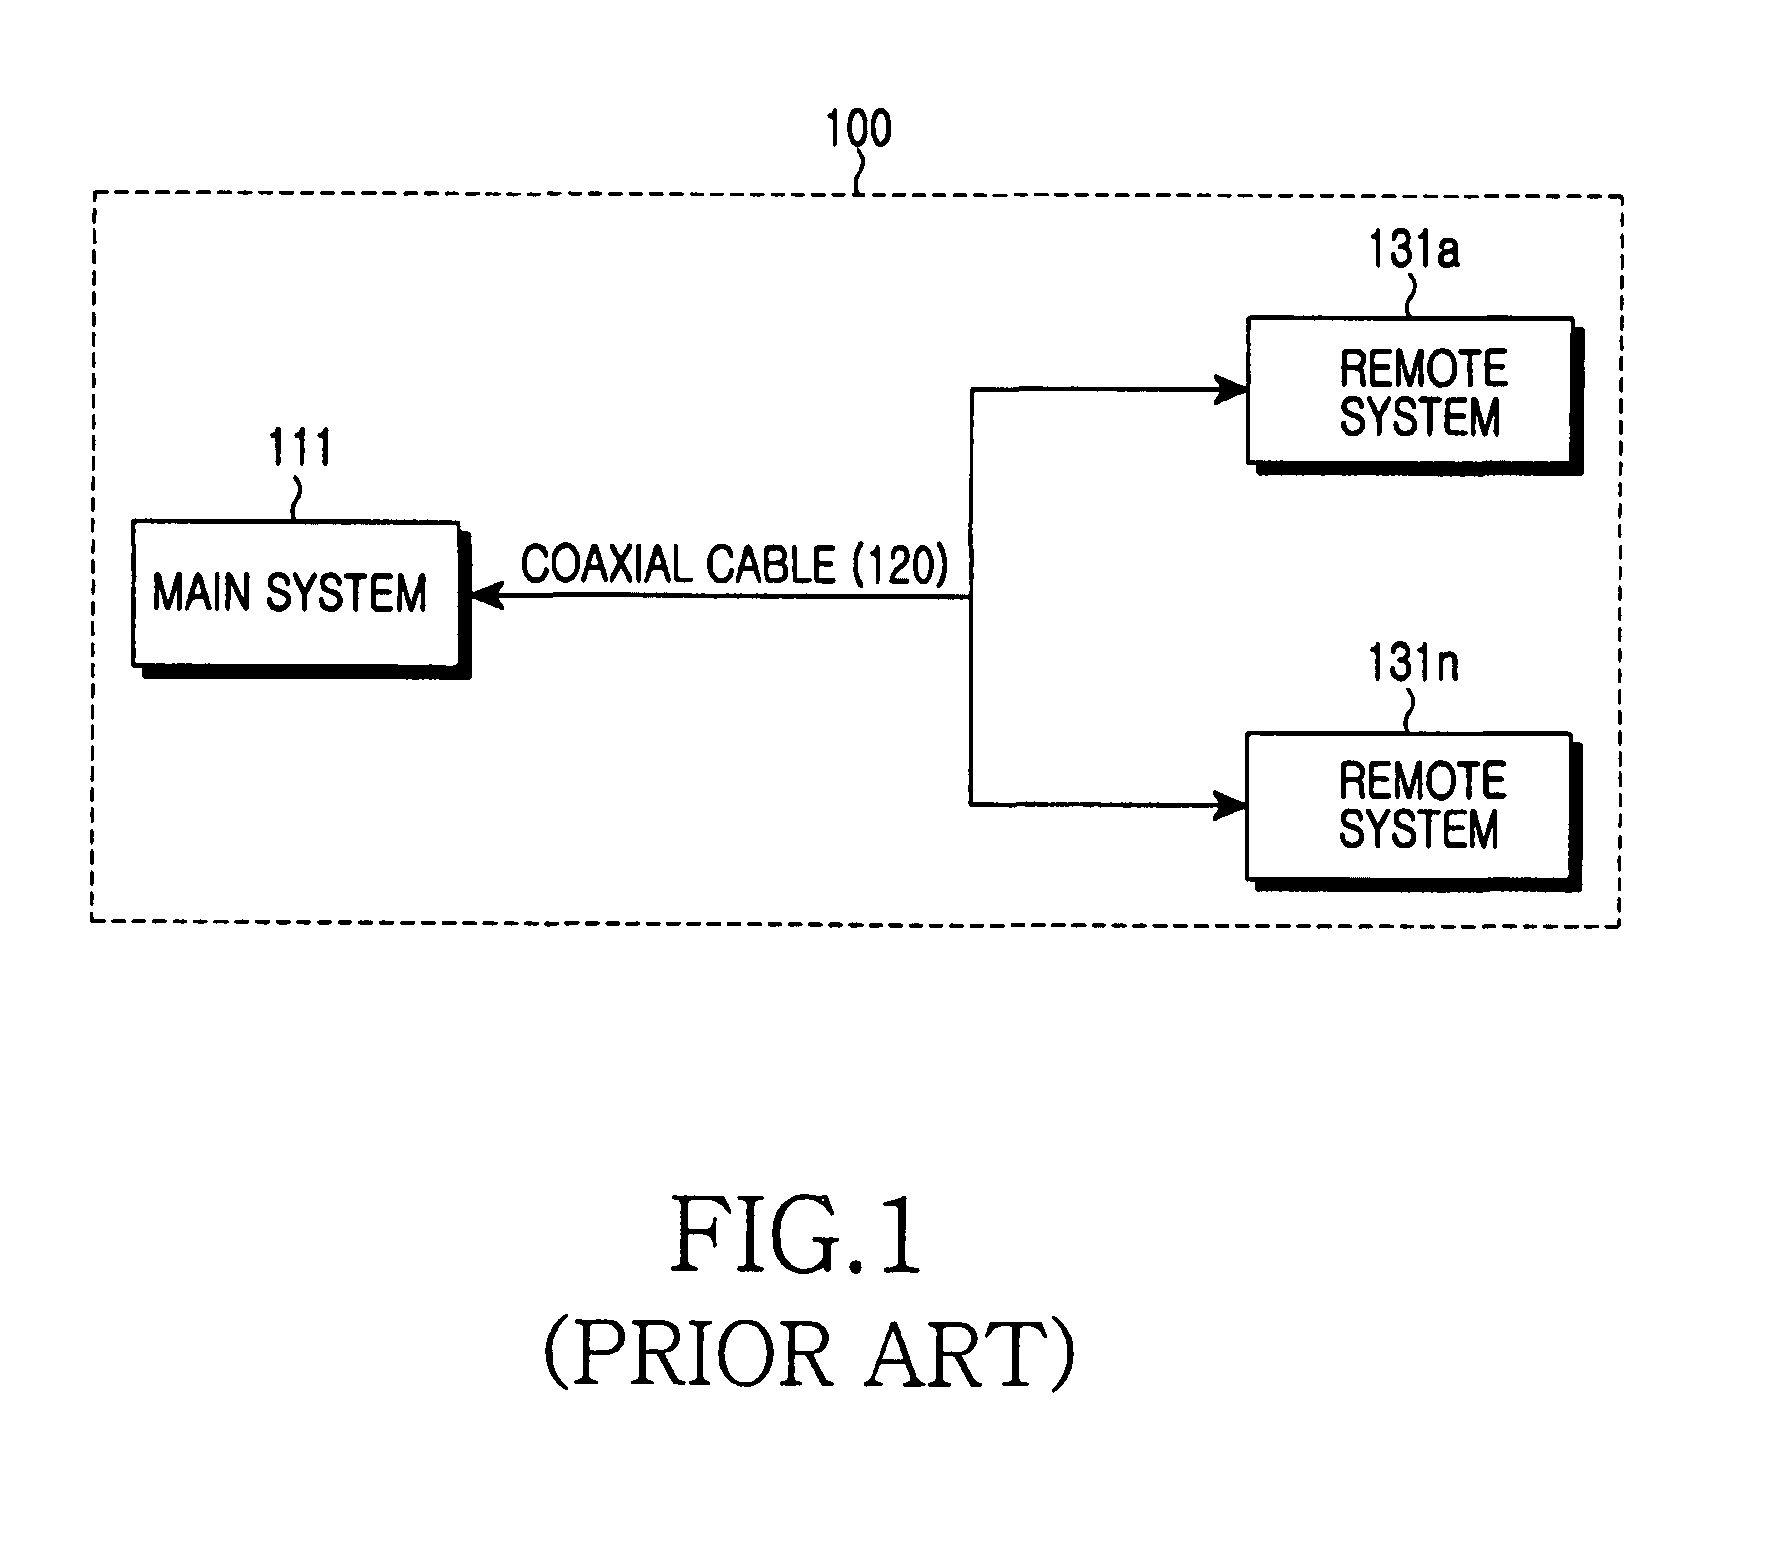 Apparatus for controlling data transmission/reception between main system and remote system of BTS in mobile communication system